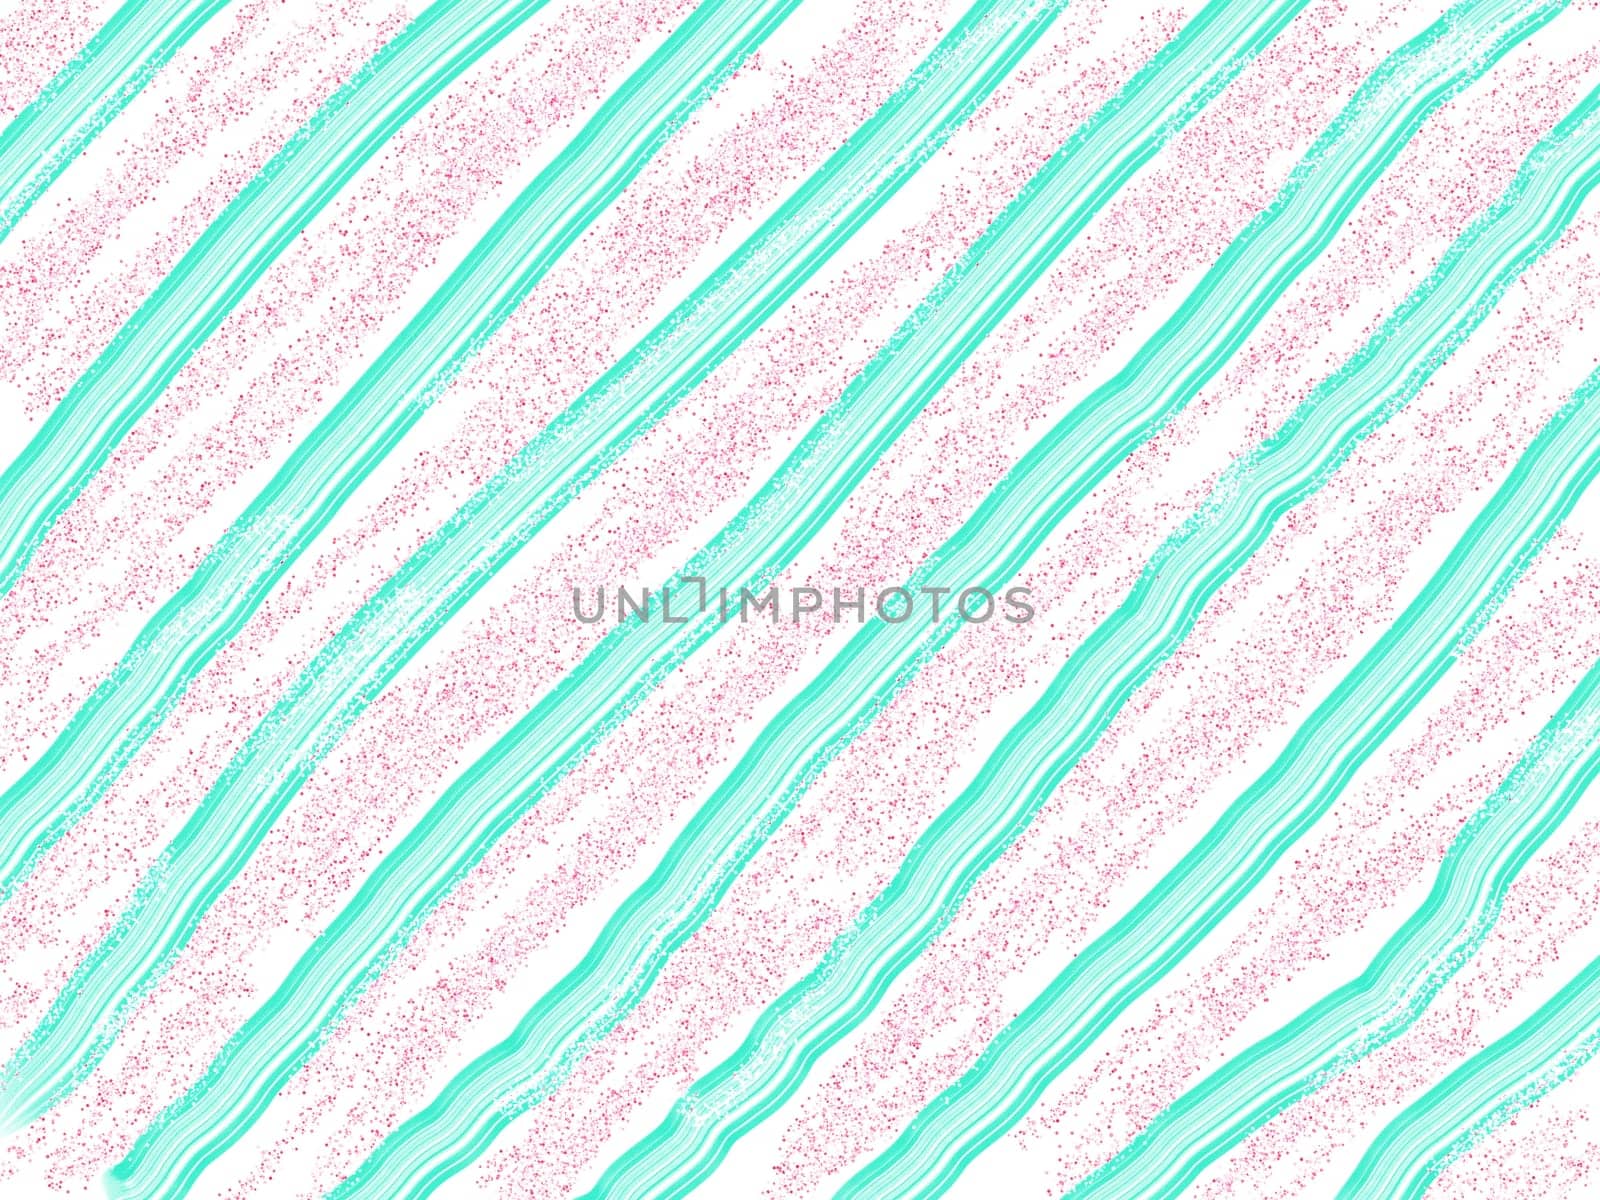 Colorful stripes across white background abstract wallpaper by gena_wells